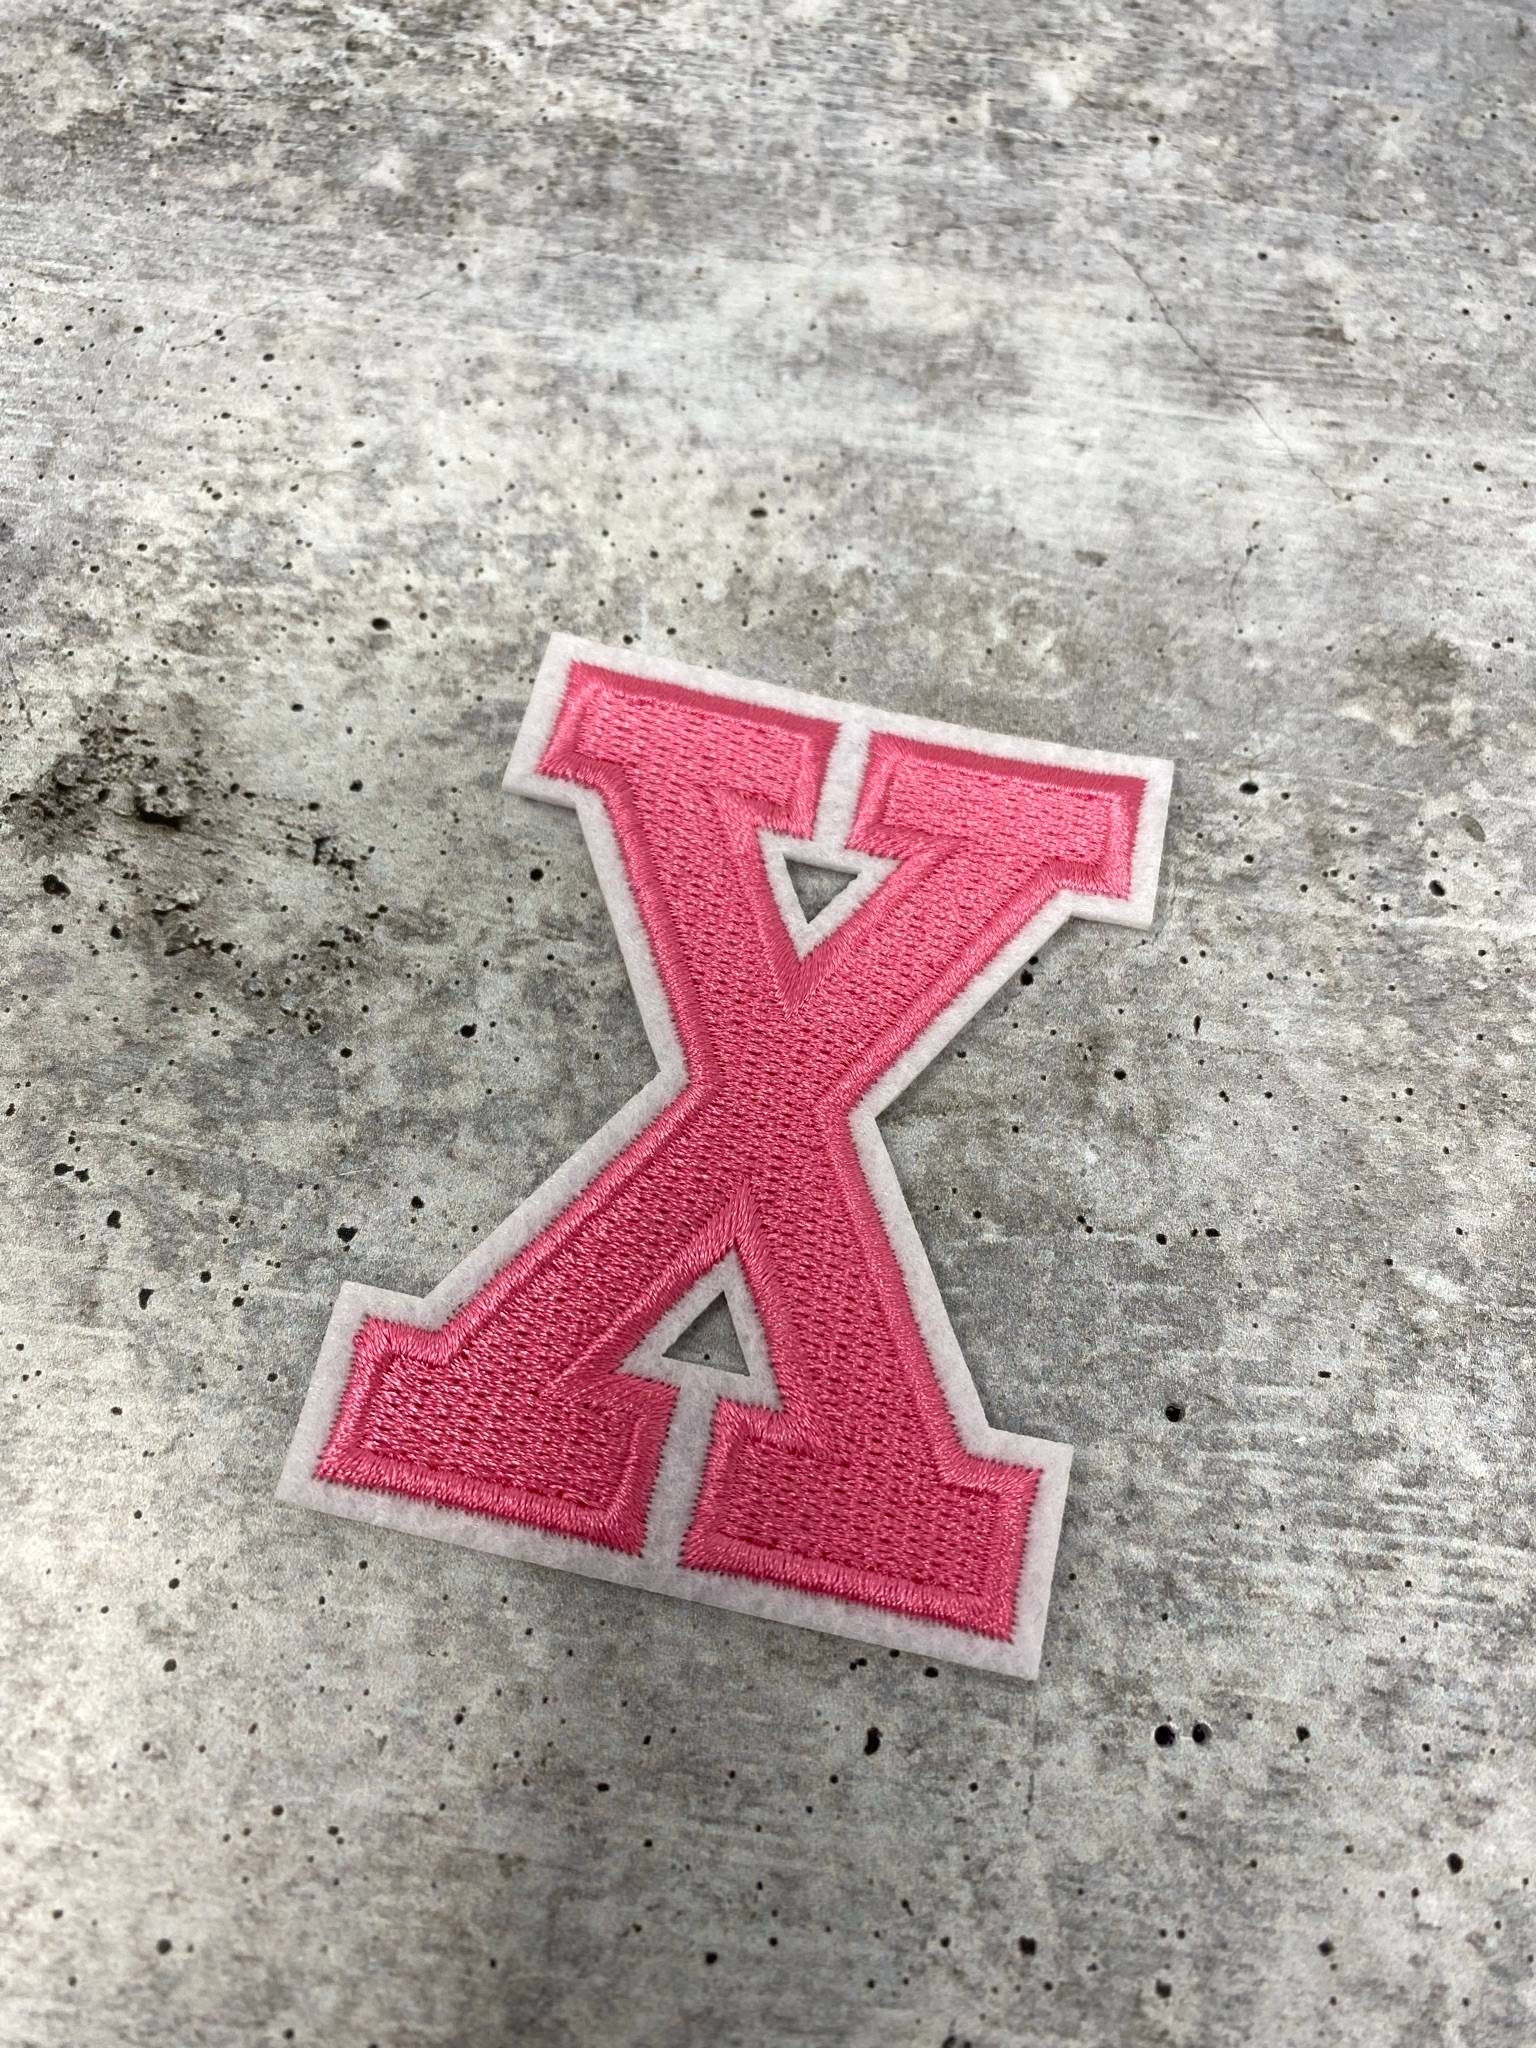 Pink Iron On Varsity Letter Patches - Sets of 3 Letters - Small